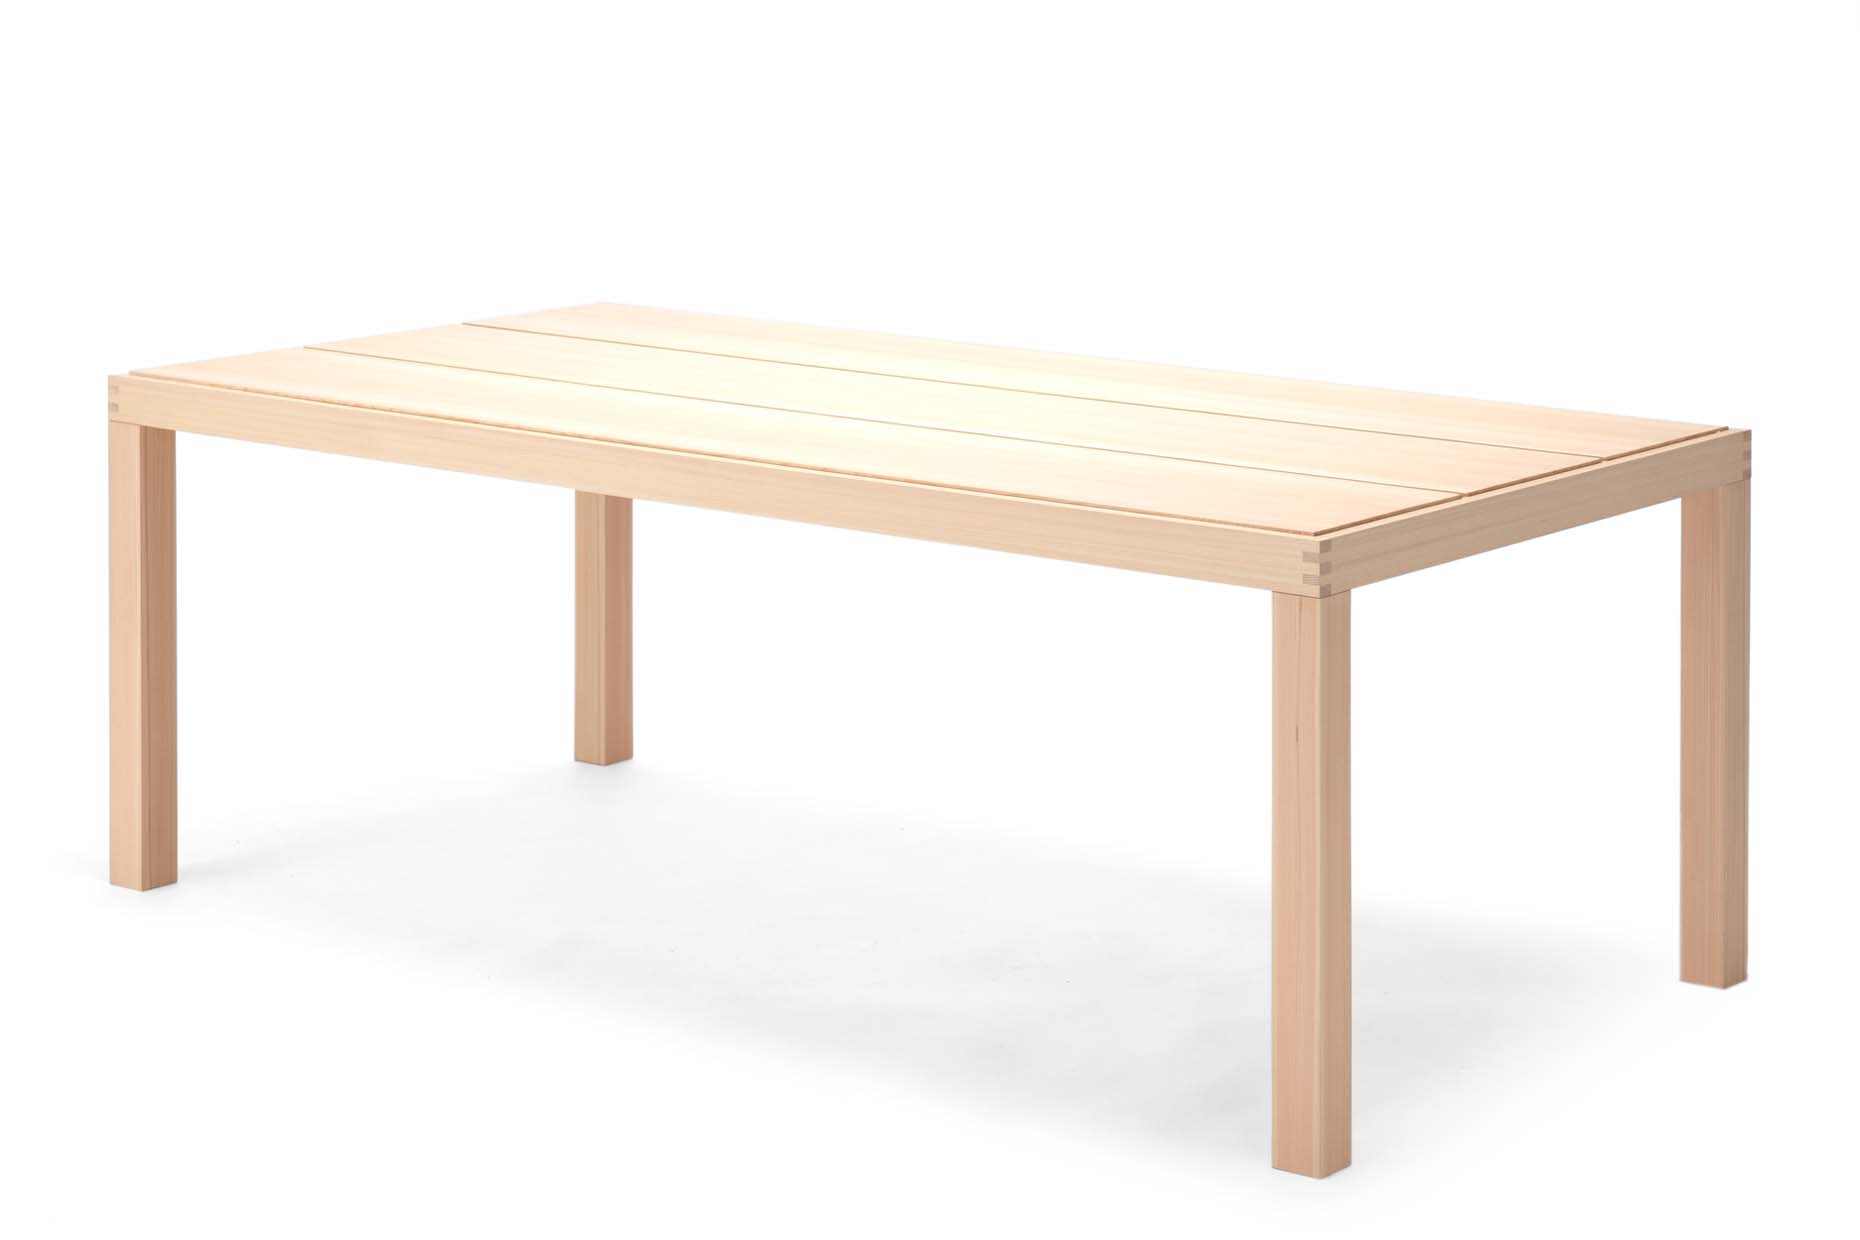 WK Dining table 01